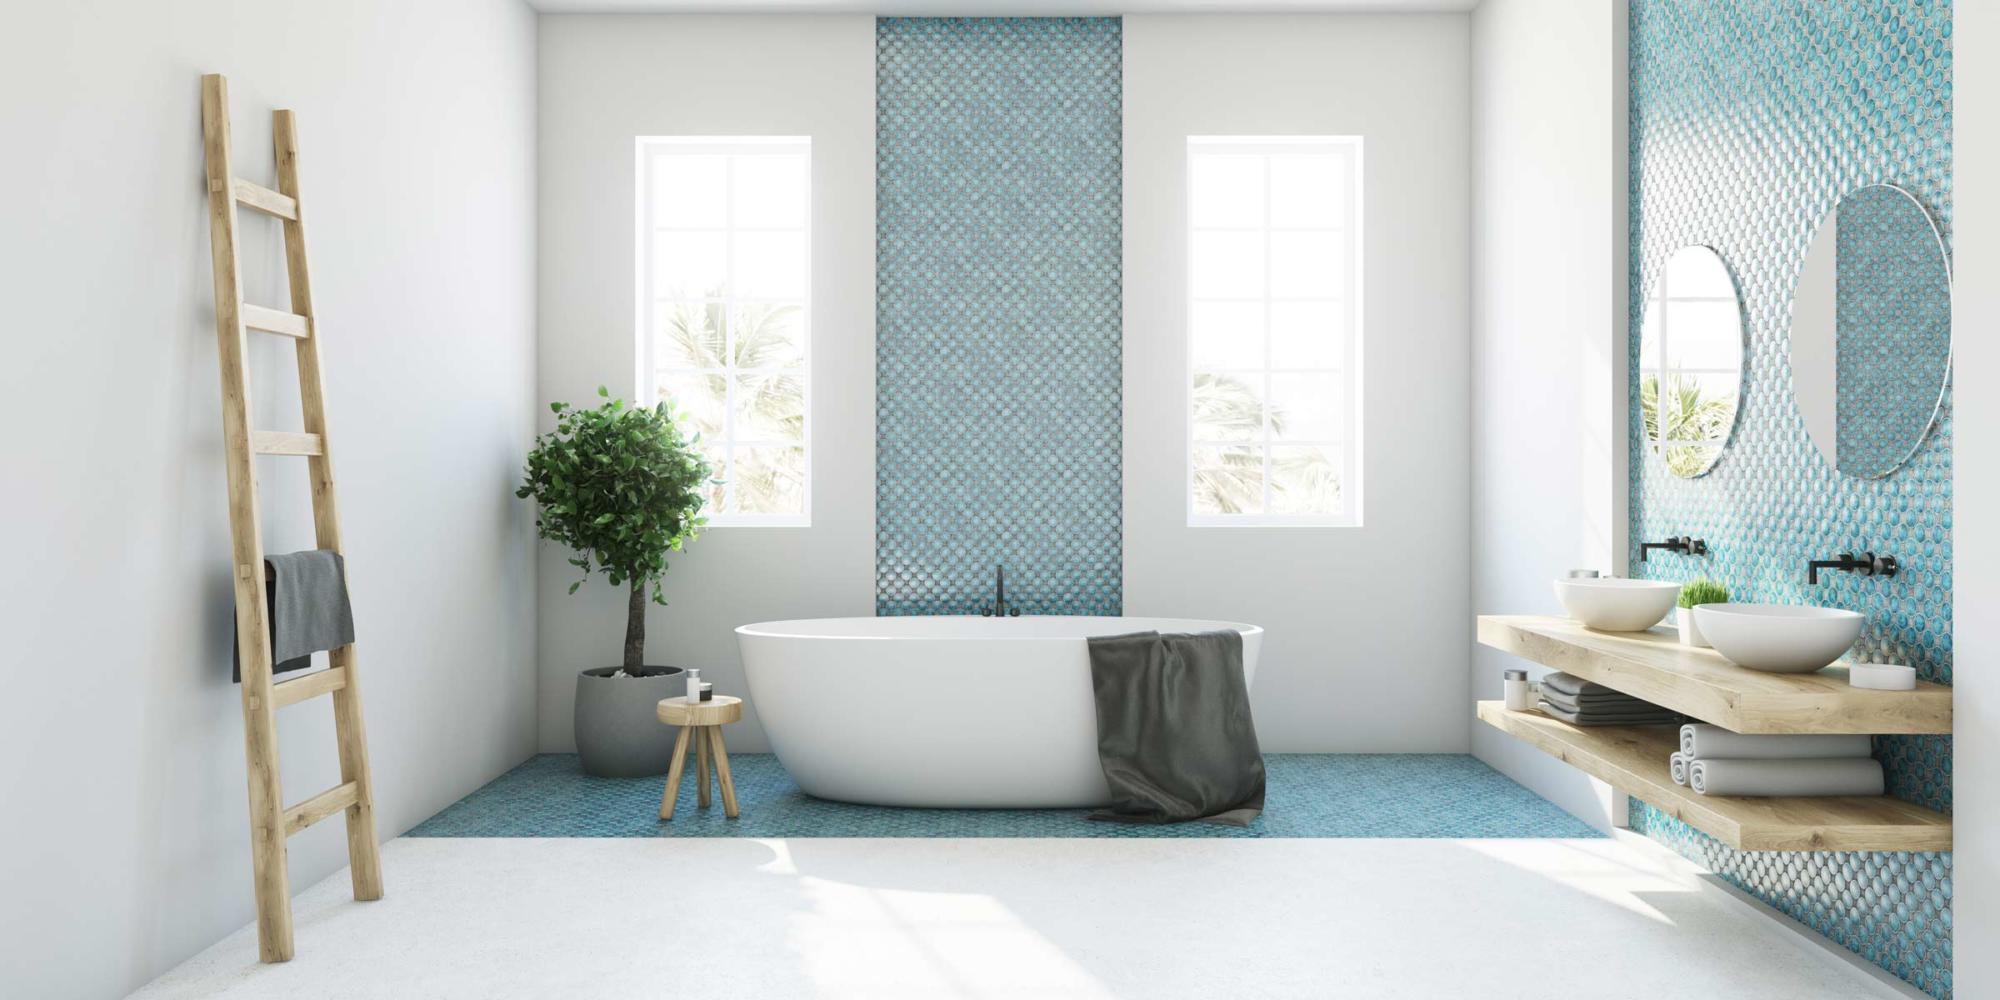 3D rendering of a modern bathroom with blue tiles for bathroom renovations.